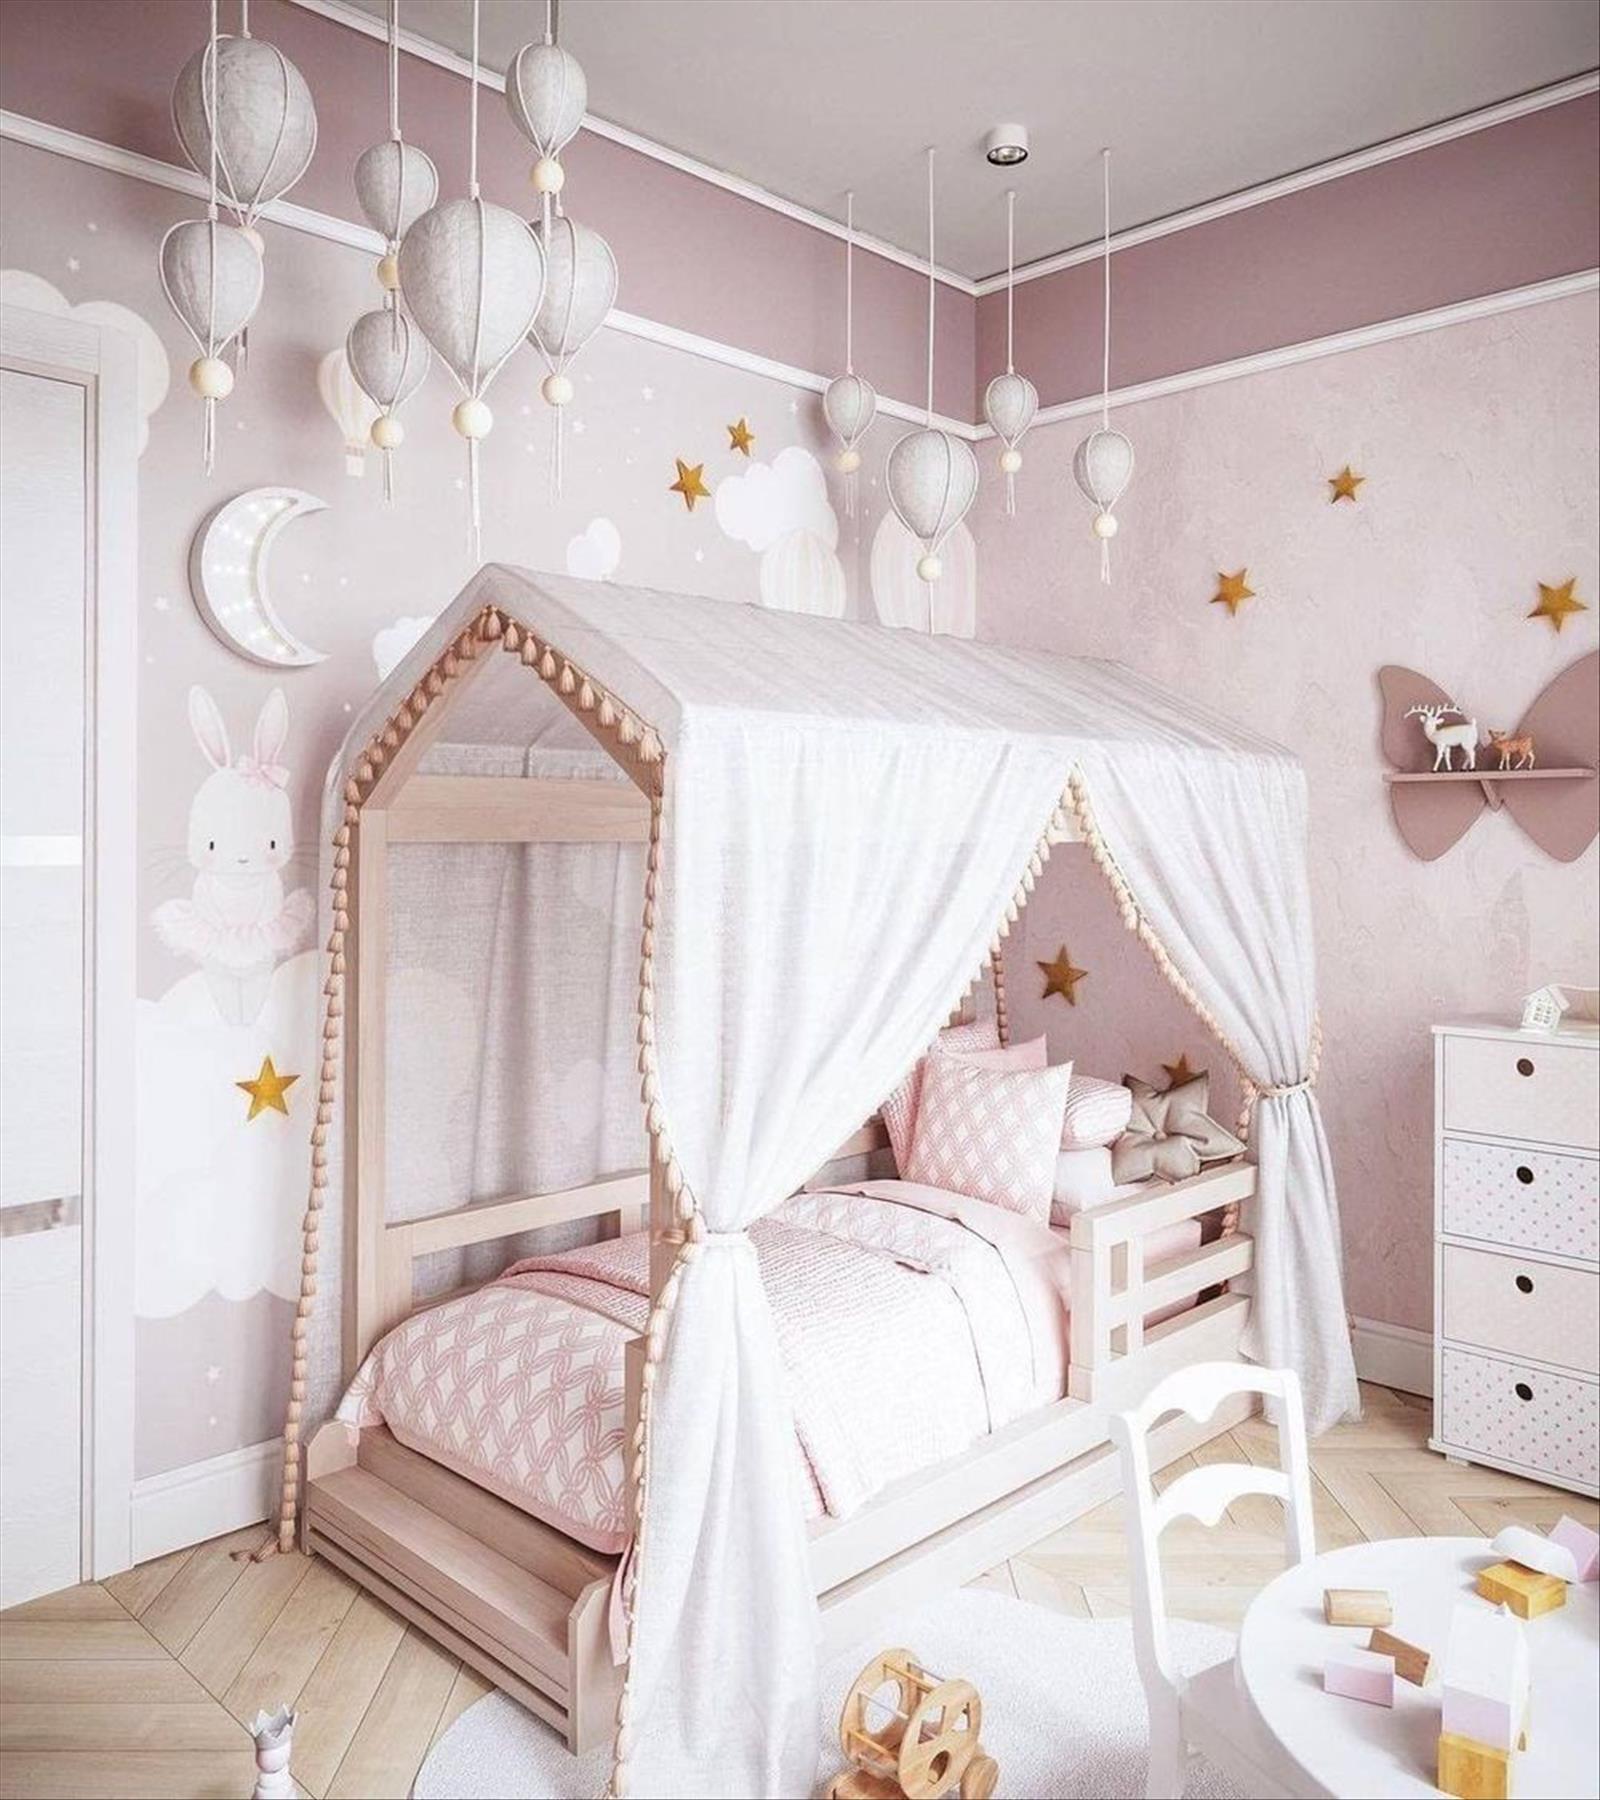 Pretty Kids' Room decor ideas to get inspired